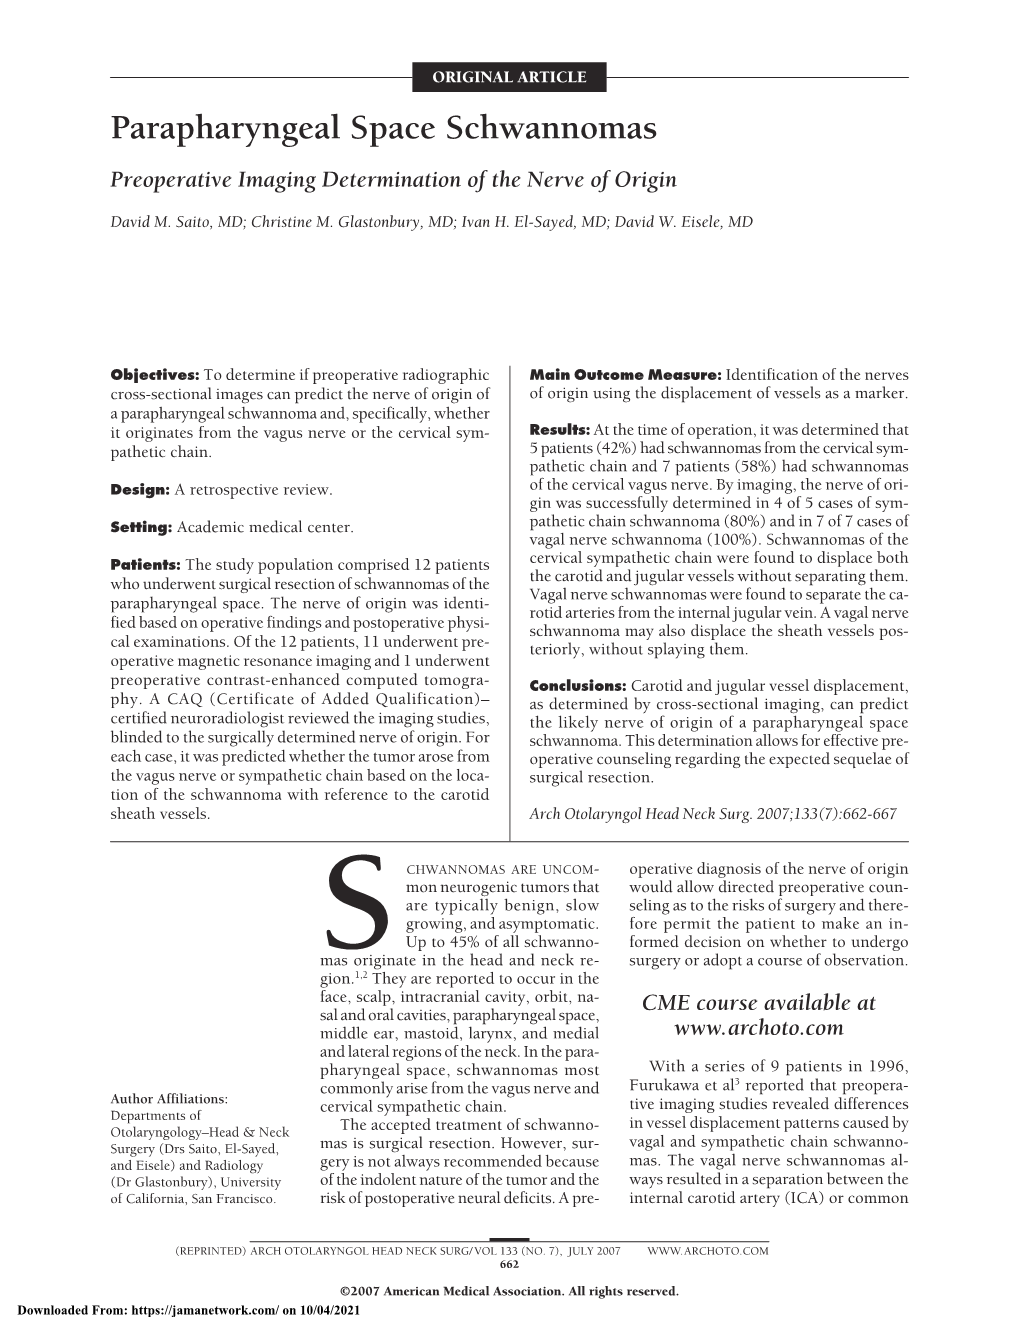 Parapharyngeal Space Schwannomas Preoperative Imaging Determination of the Nerve of Origin